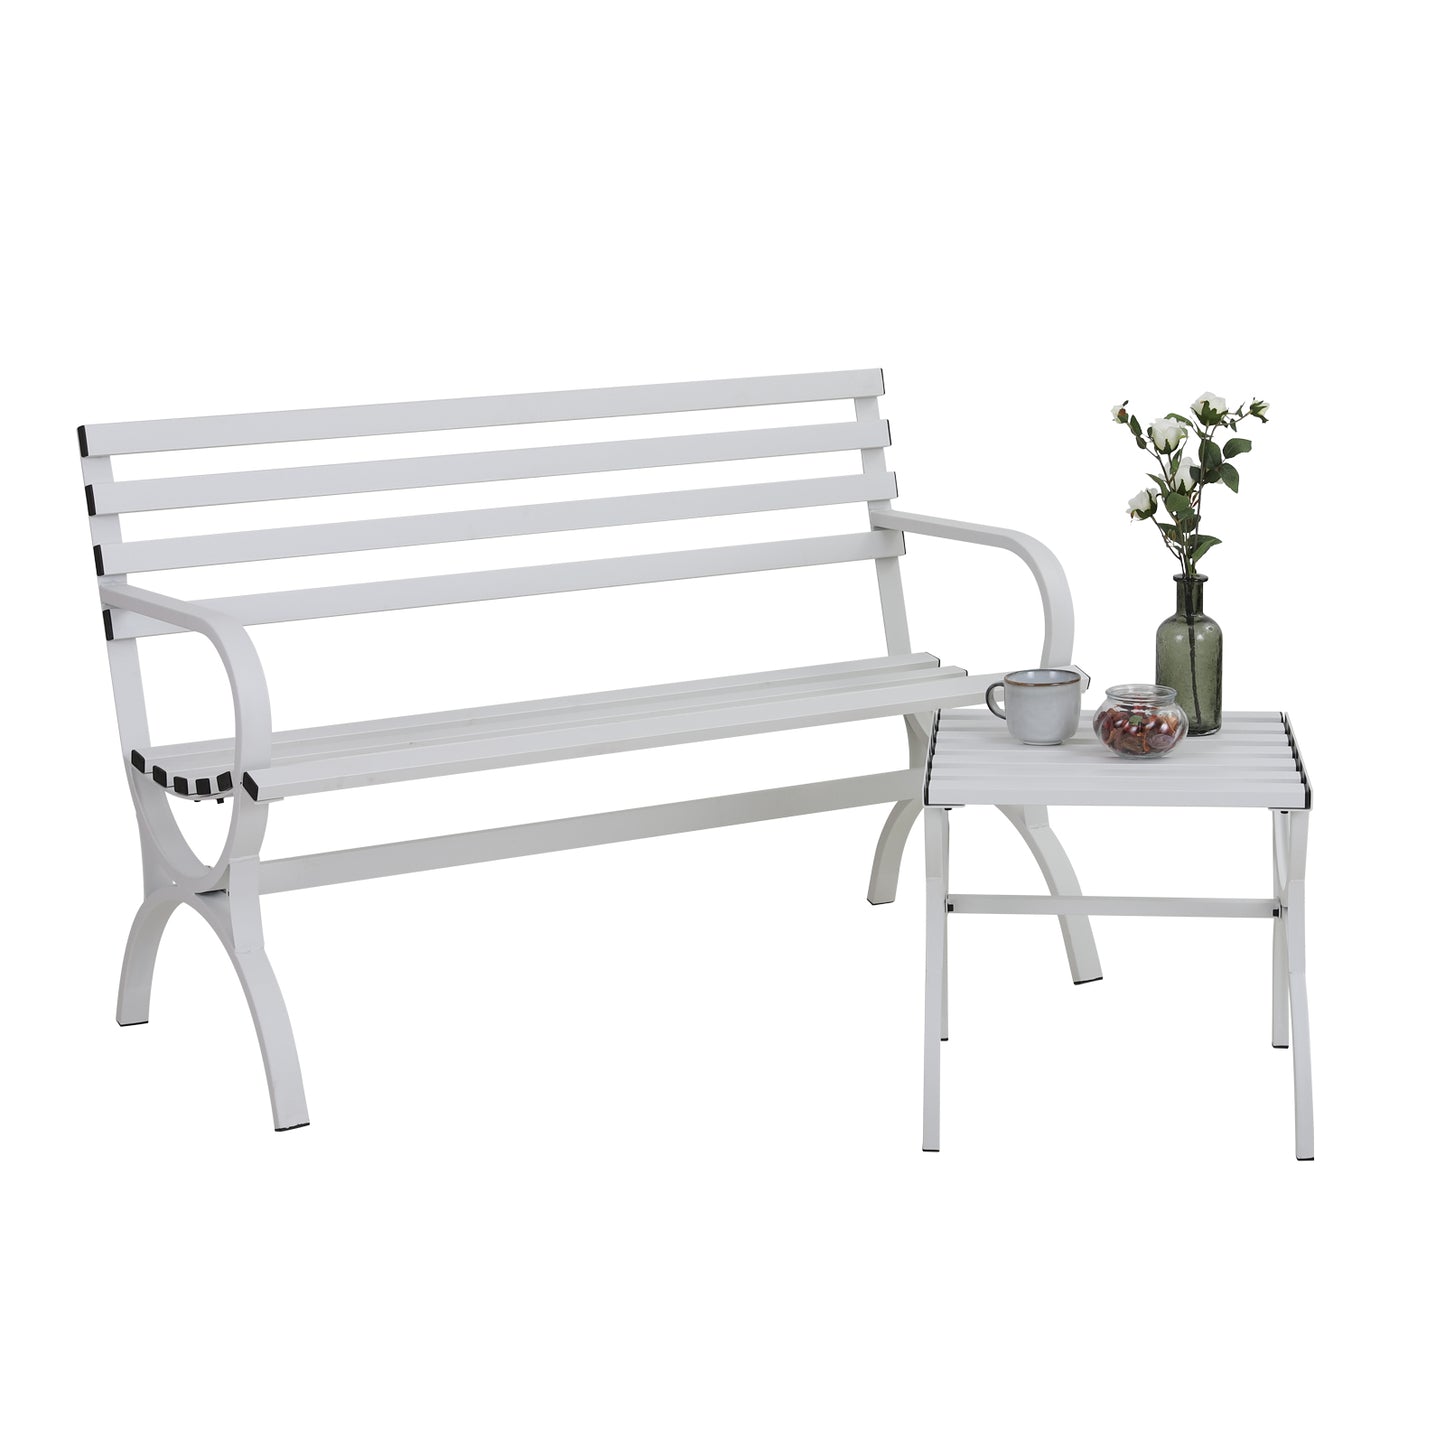 Sophia & William 2 Pieces Metal Outdoor Garden Bench with Side Table - White